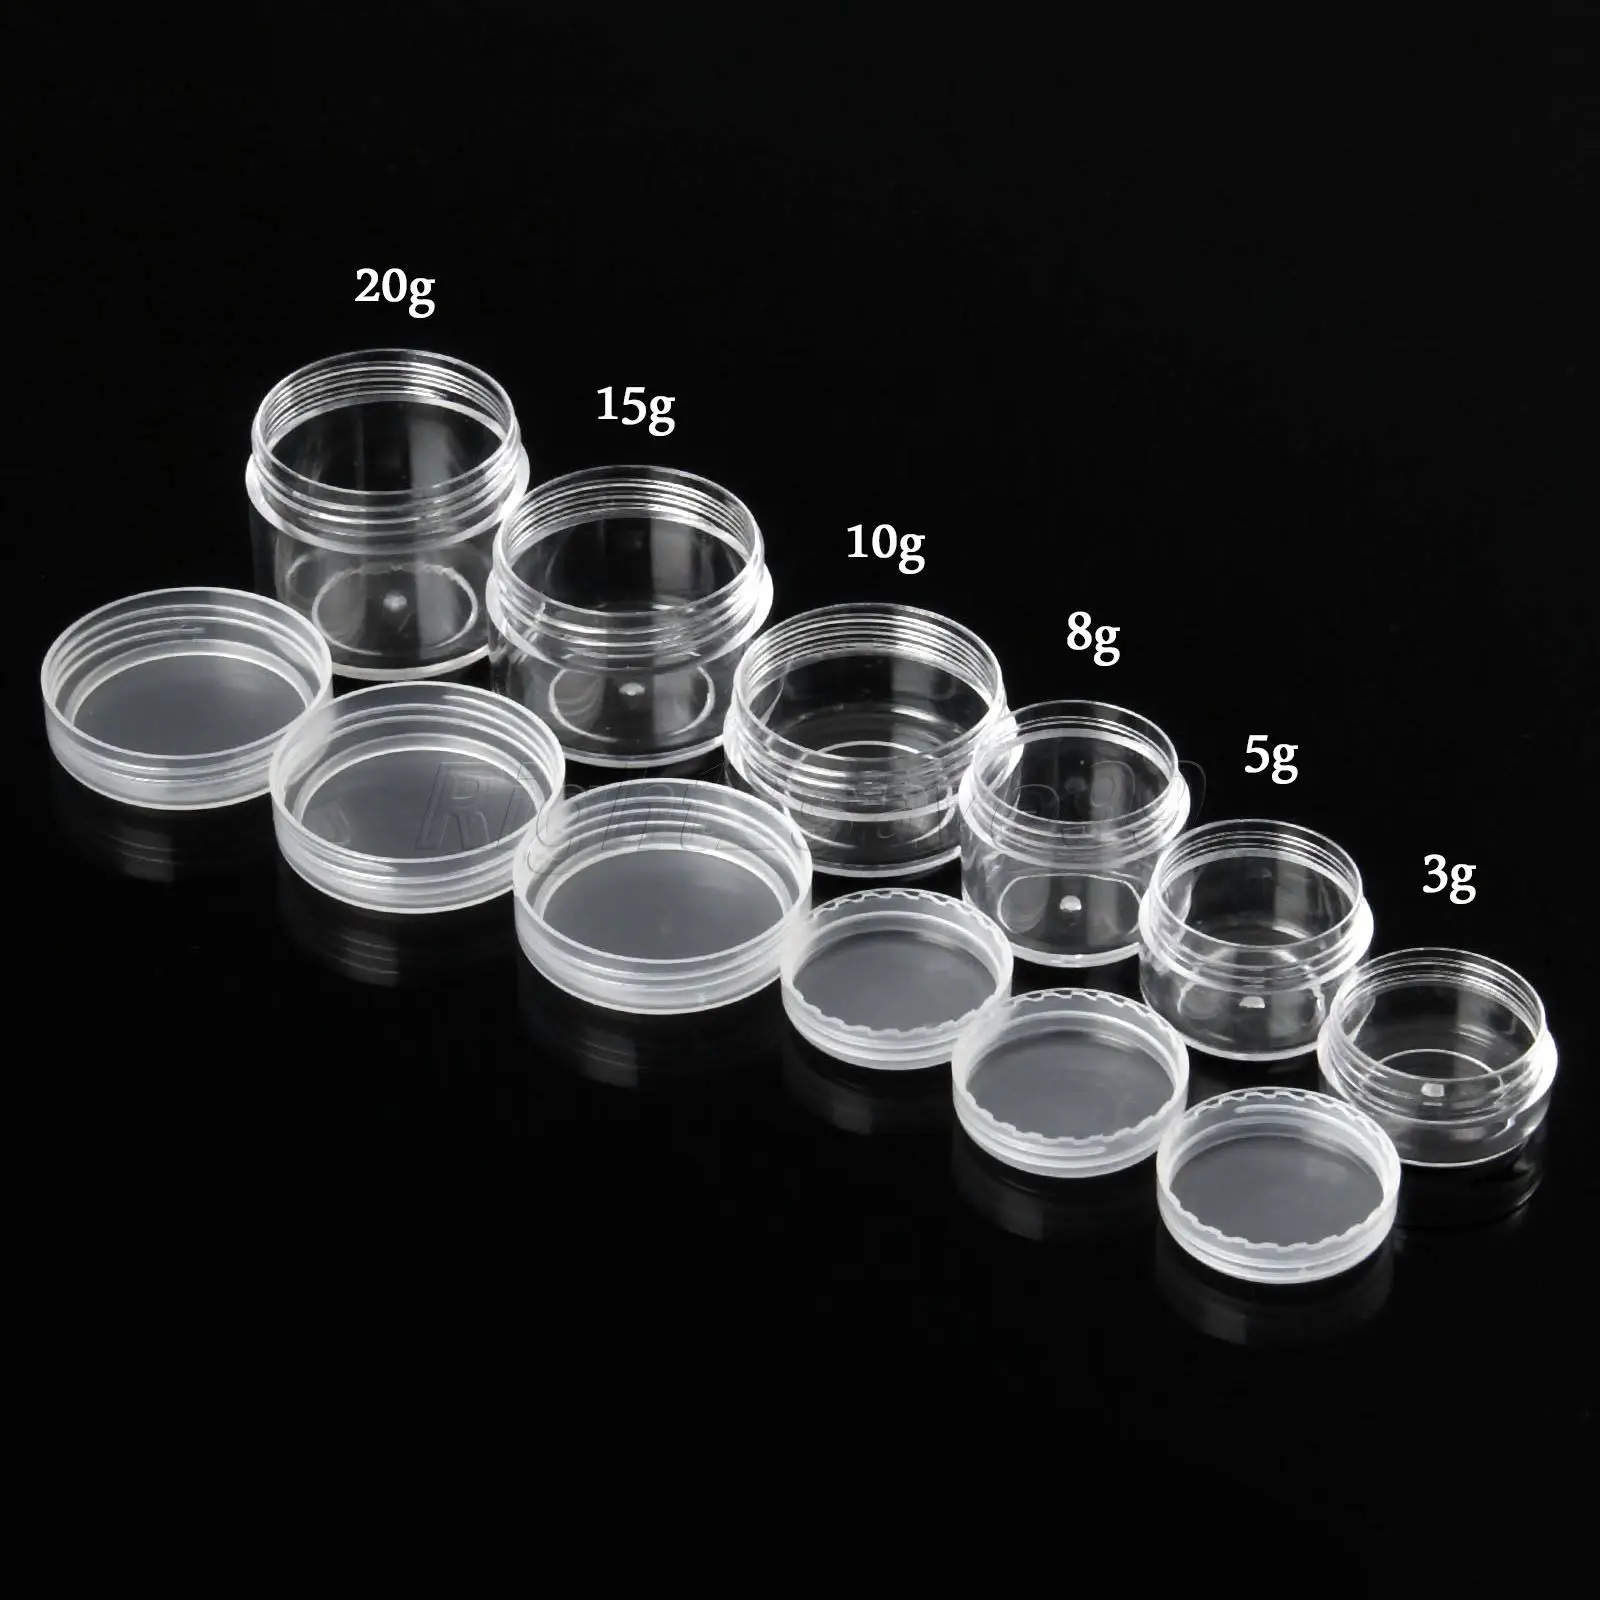 

5pcs 3g 5g 8g 10g 15g 20g Portable Plastic Cosmetic Empty Jars Clear Bottles Eyeshadow Makeup Cream Lip Balm Container Pots